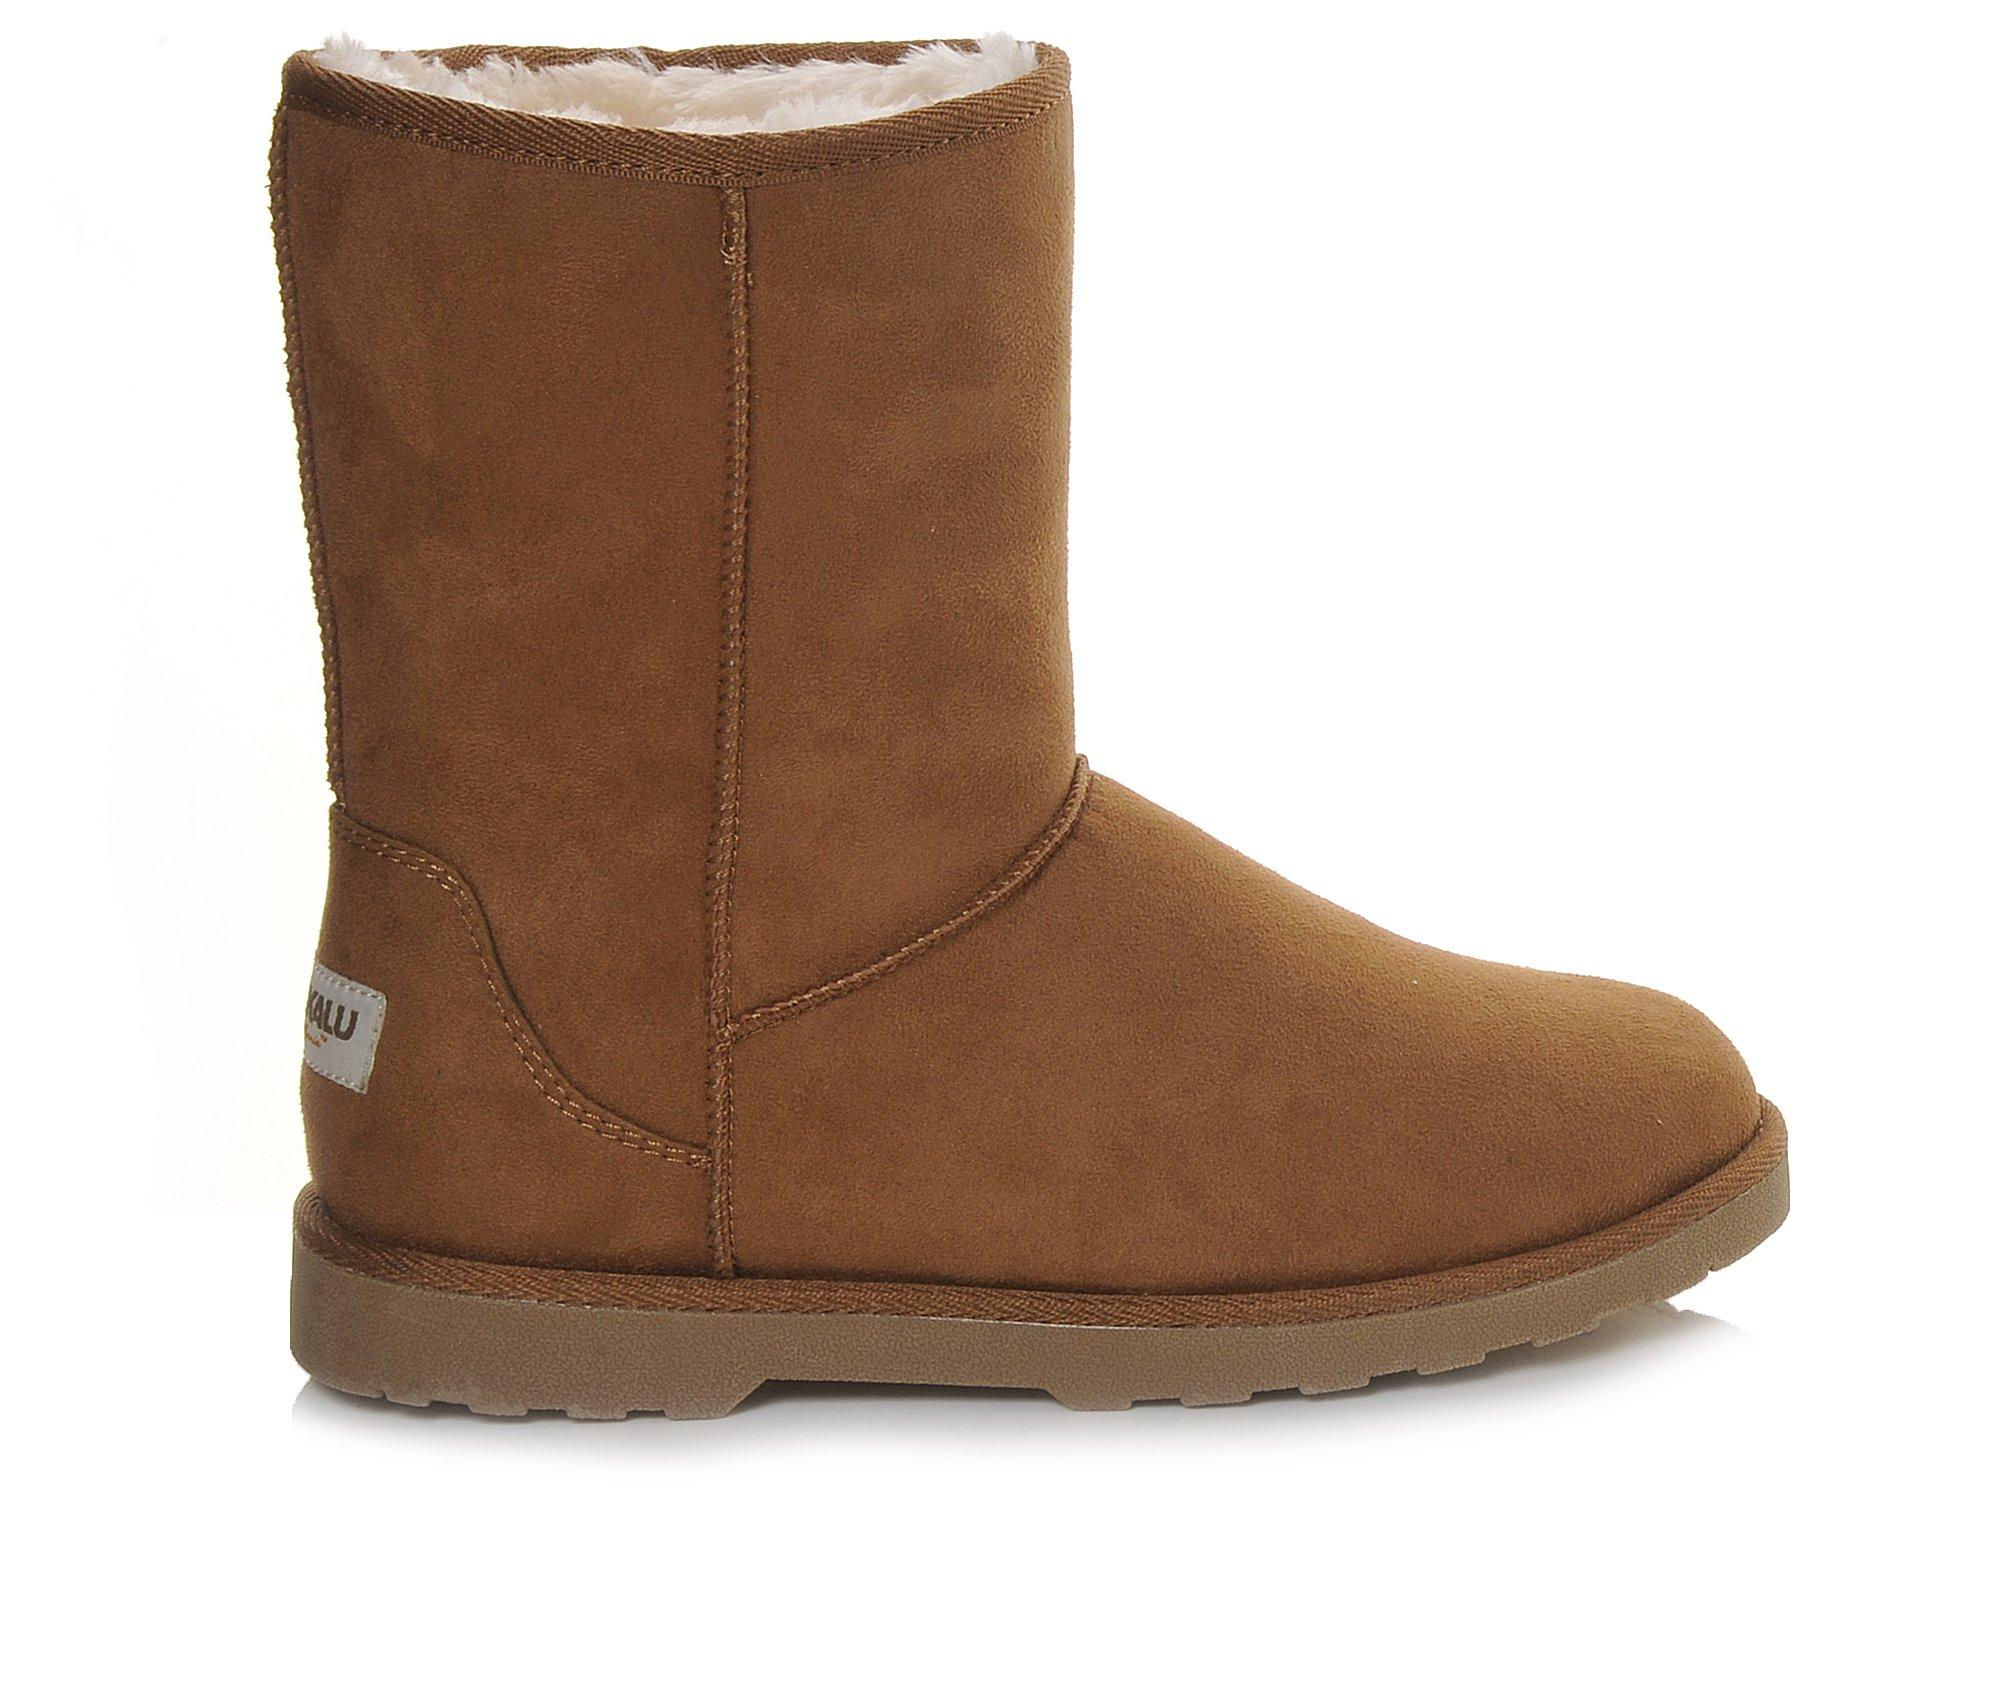 Women's Winter Boots, Snow Boots | Shoe Carnival